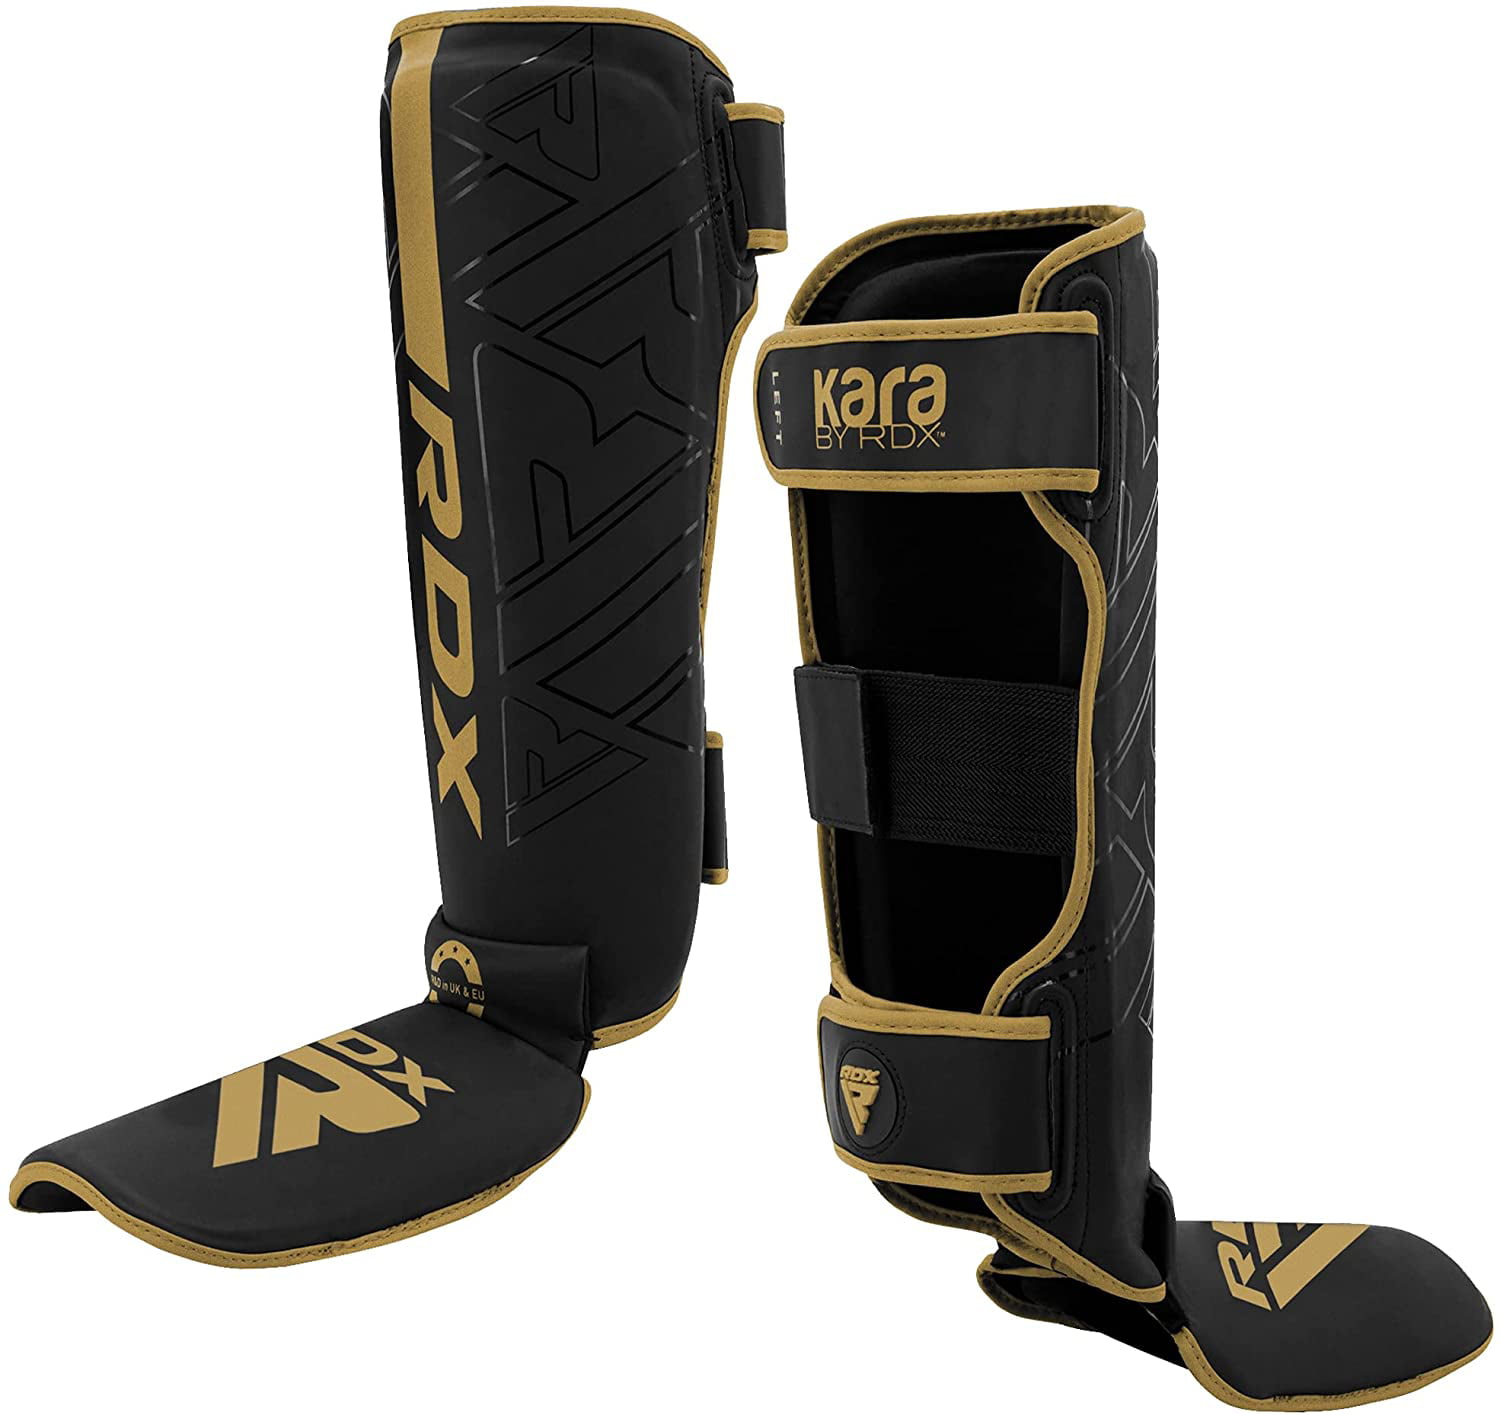 Protector Pads for Martial Arts Sparring Muay Thai Maya Hide Leather Instep Leg Protective Gear BJJ and Boxing Shin Guards for Kickboxing MMA Training and Fighting 